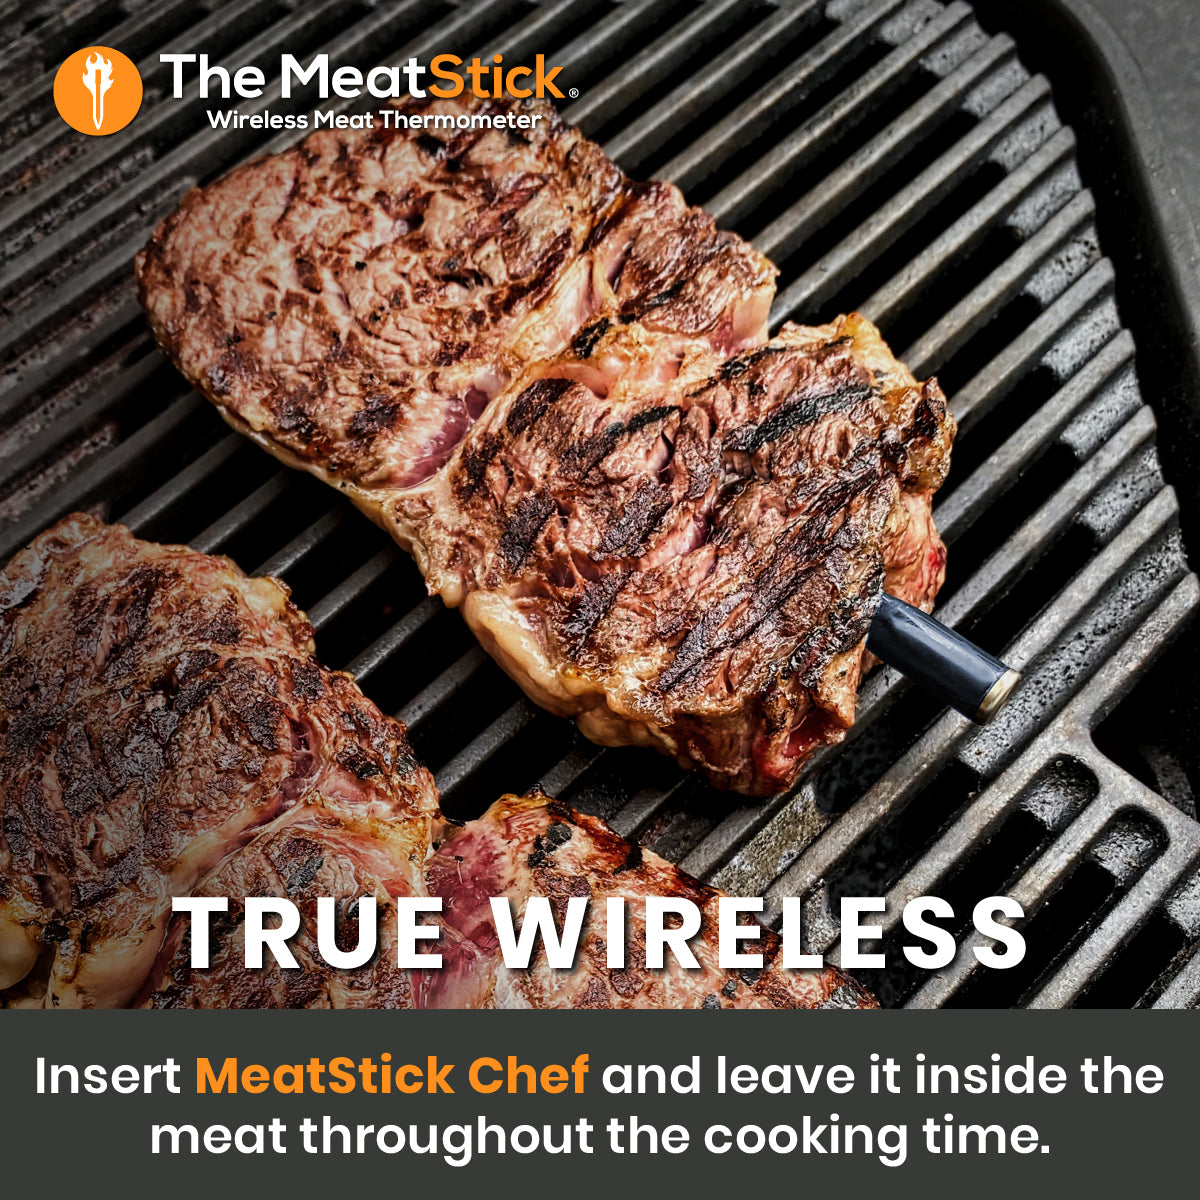  MeatStick MiniX Set, Wireless Meat Thermometer with Bluetooth, 260ft Range